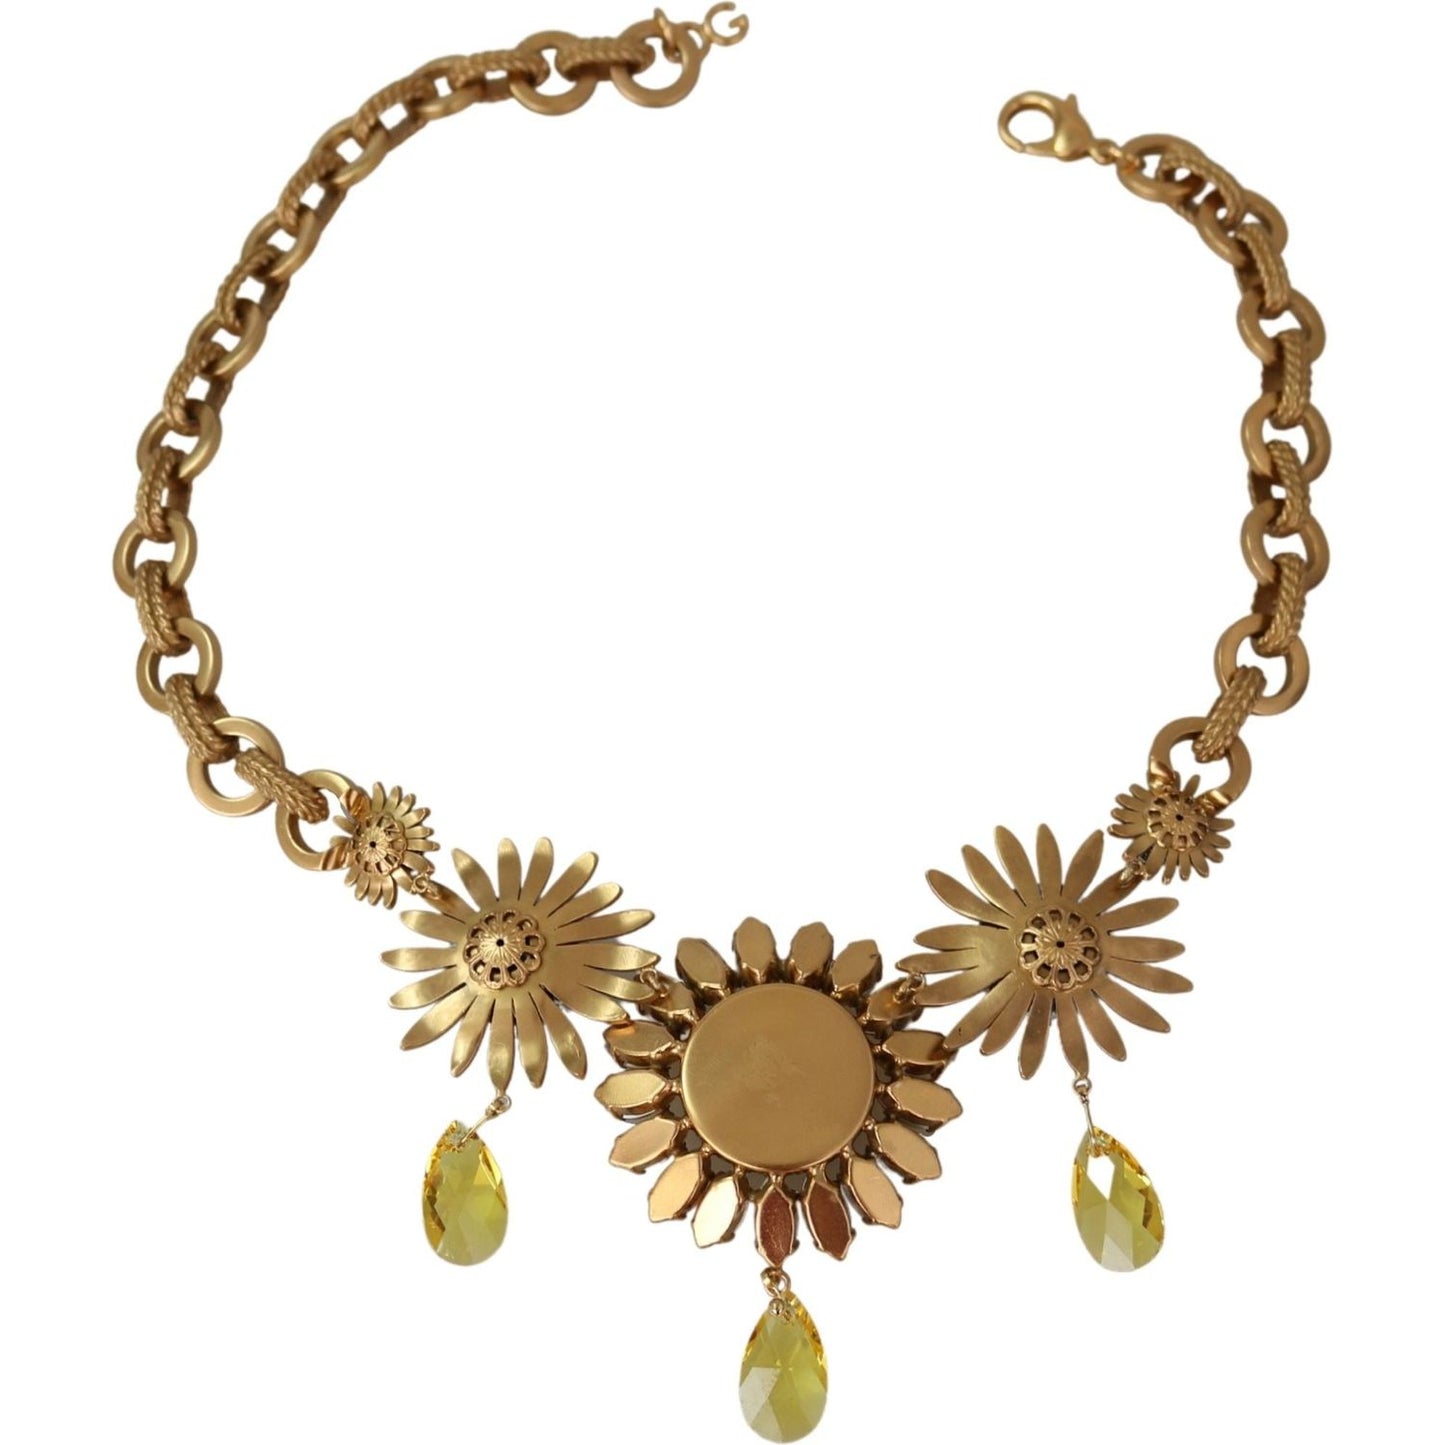 Dolce & Gabbana Elegant Gold Floral Crystal Statement Necklace Necklace gold-brass-chain-crystal-sunlower-pendants-necklace